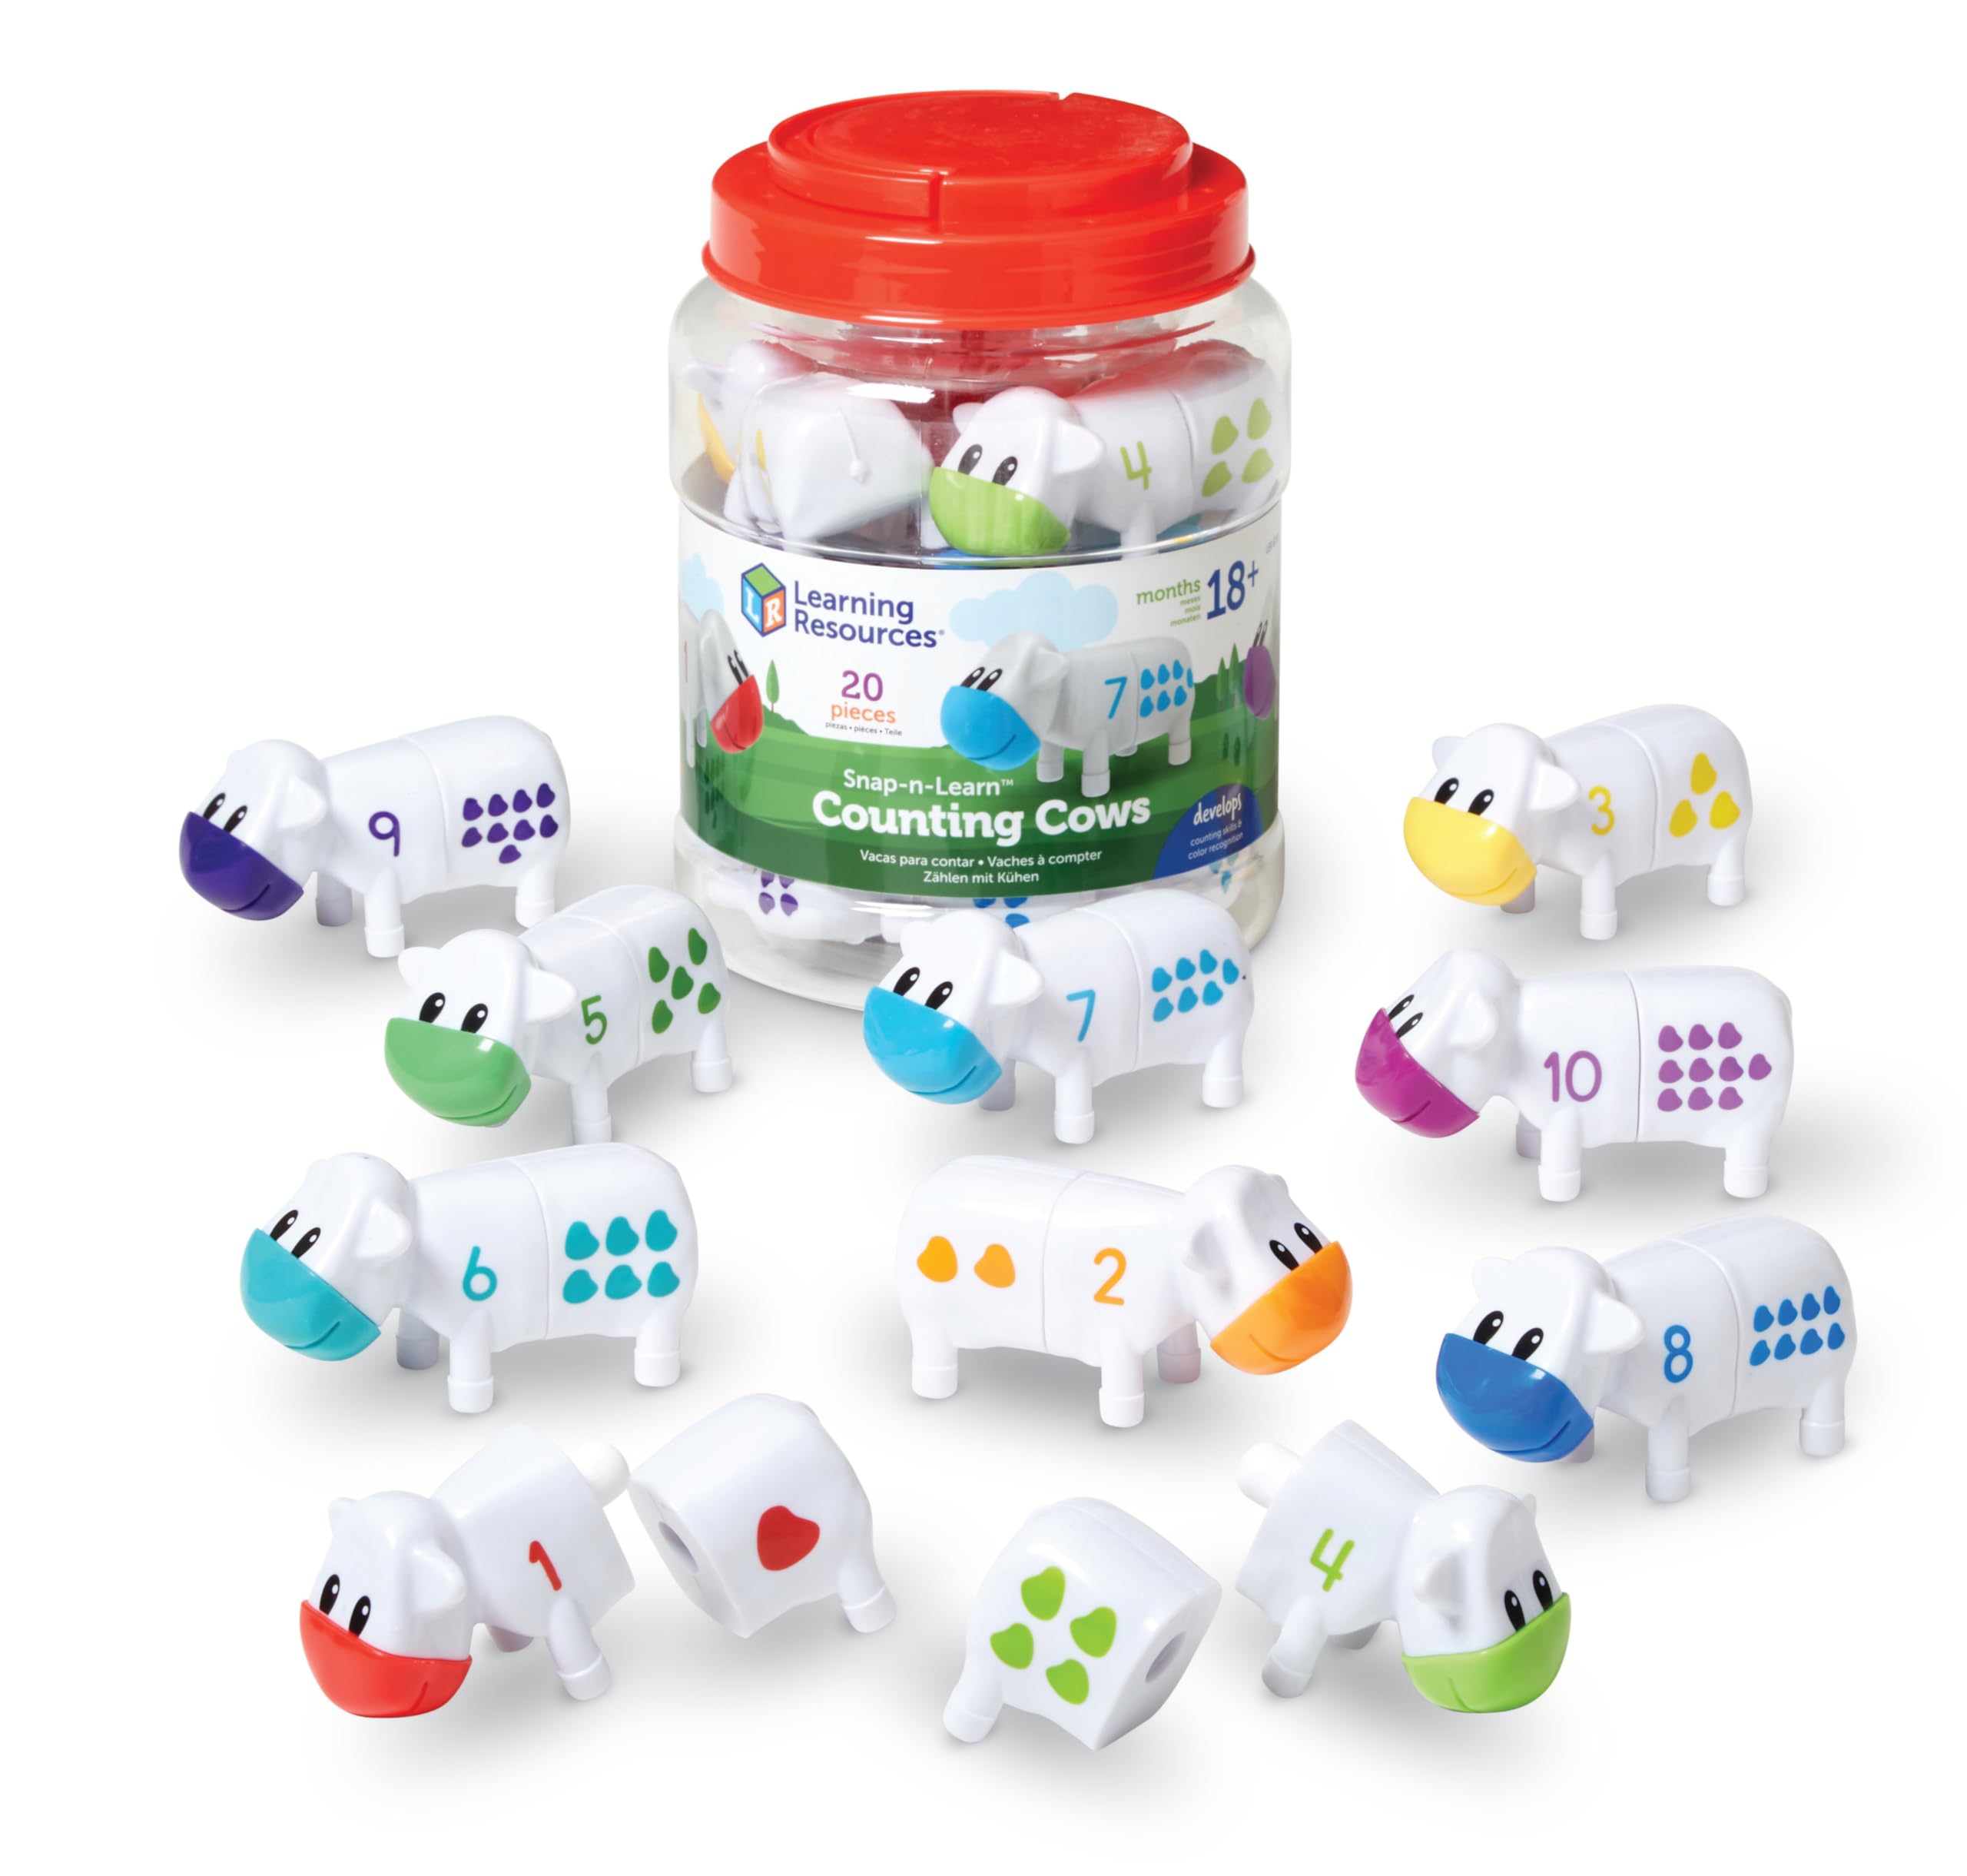 20-Piece Learning Resources Snap-n-Learn Counting Cows Toy Set $11.50 + Free Shipping w/ Prime or on $35+